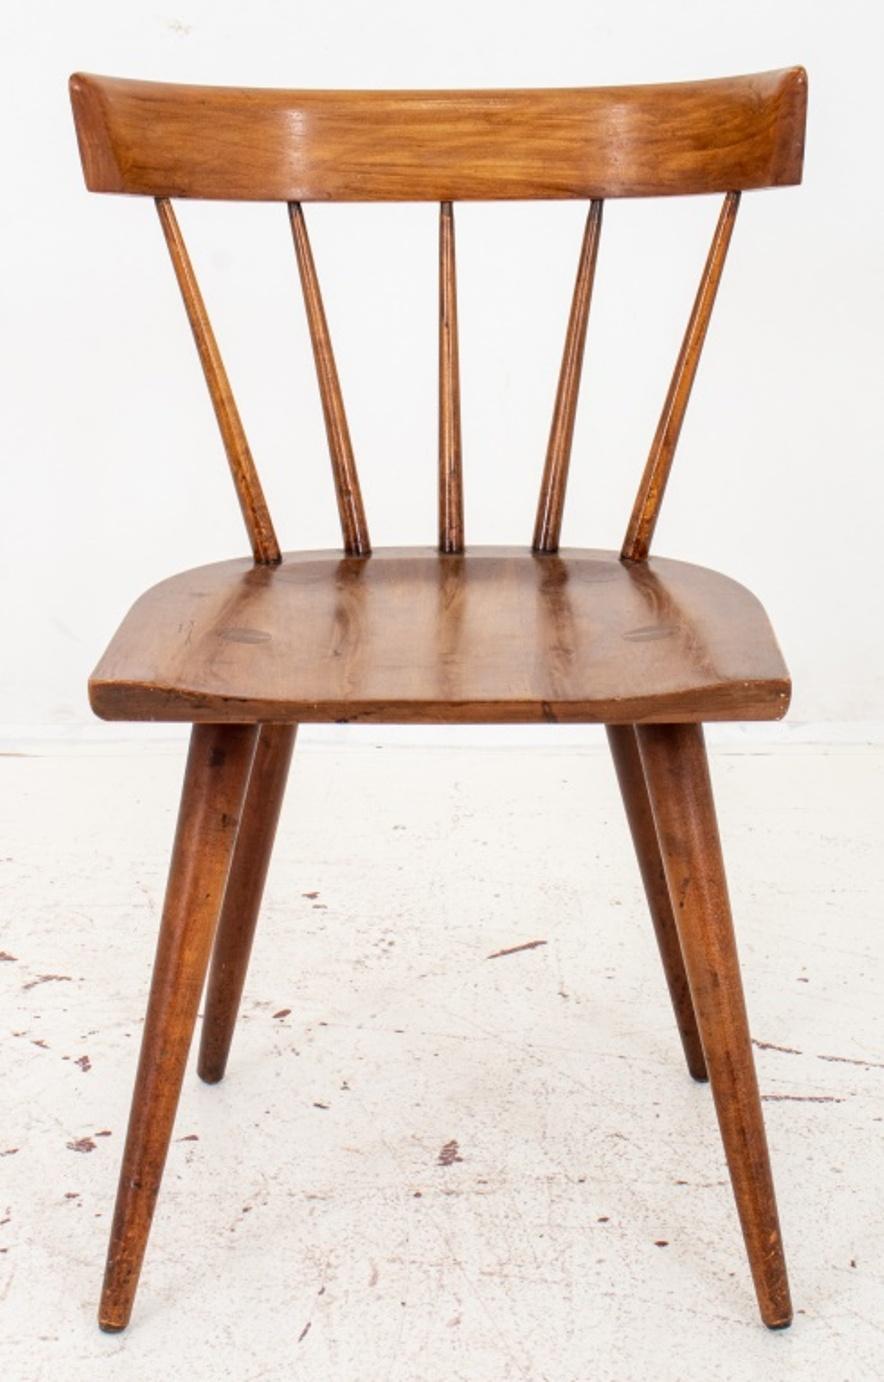 Paul McCobb (American, 1917-1969) for Winchendon, Spindle Back Planner Group Chair (designed 1950) ca. 1950s or later, the curved backrest on five tapering spindles above a shaped seat on four tapering cylindrical legs. In good vintage condition.